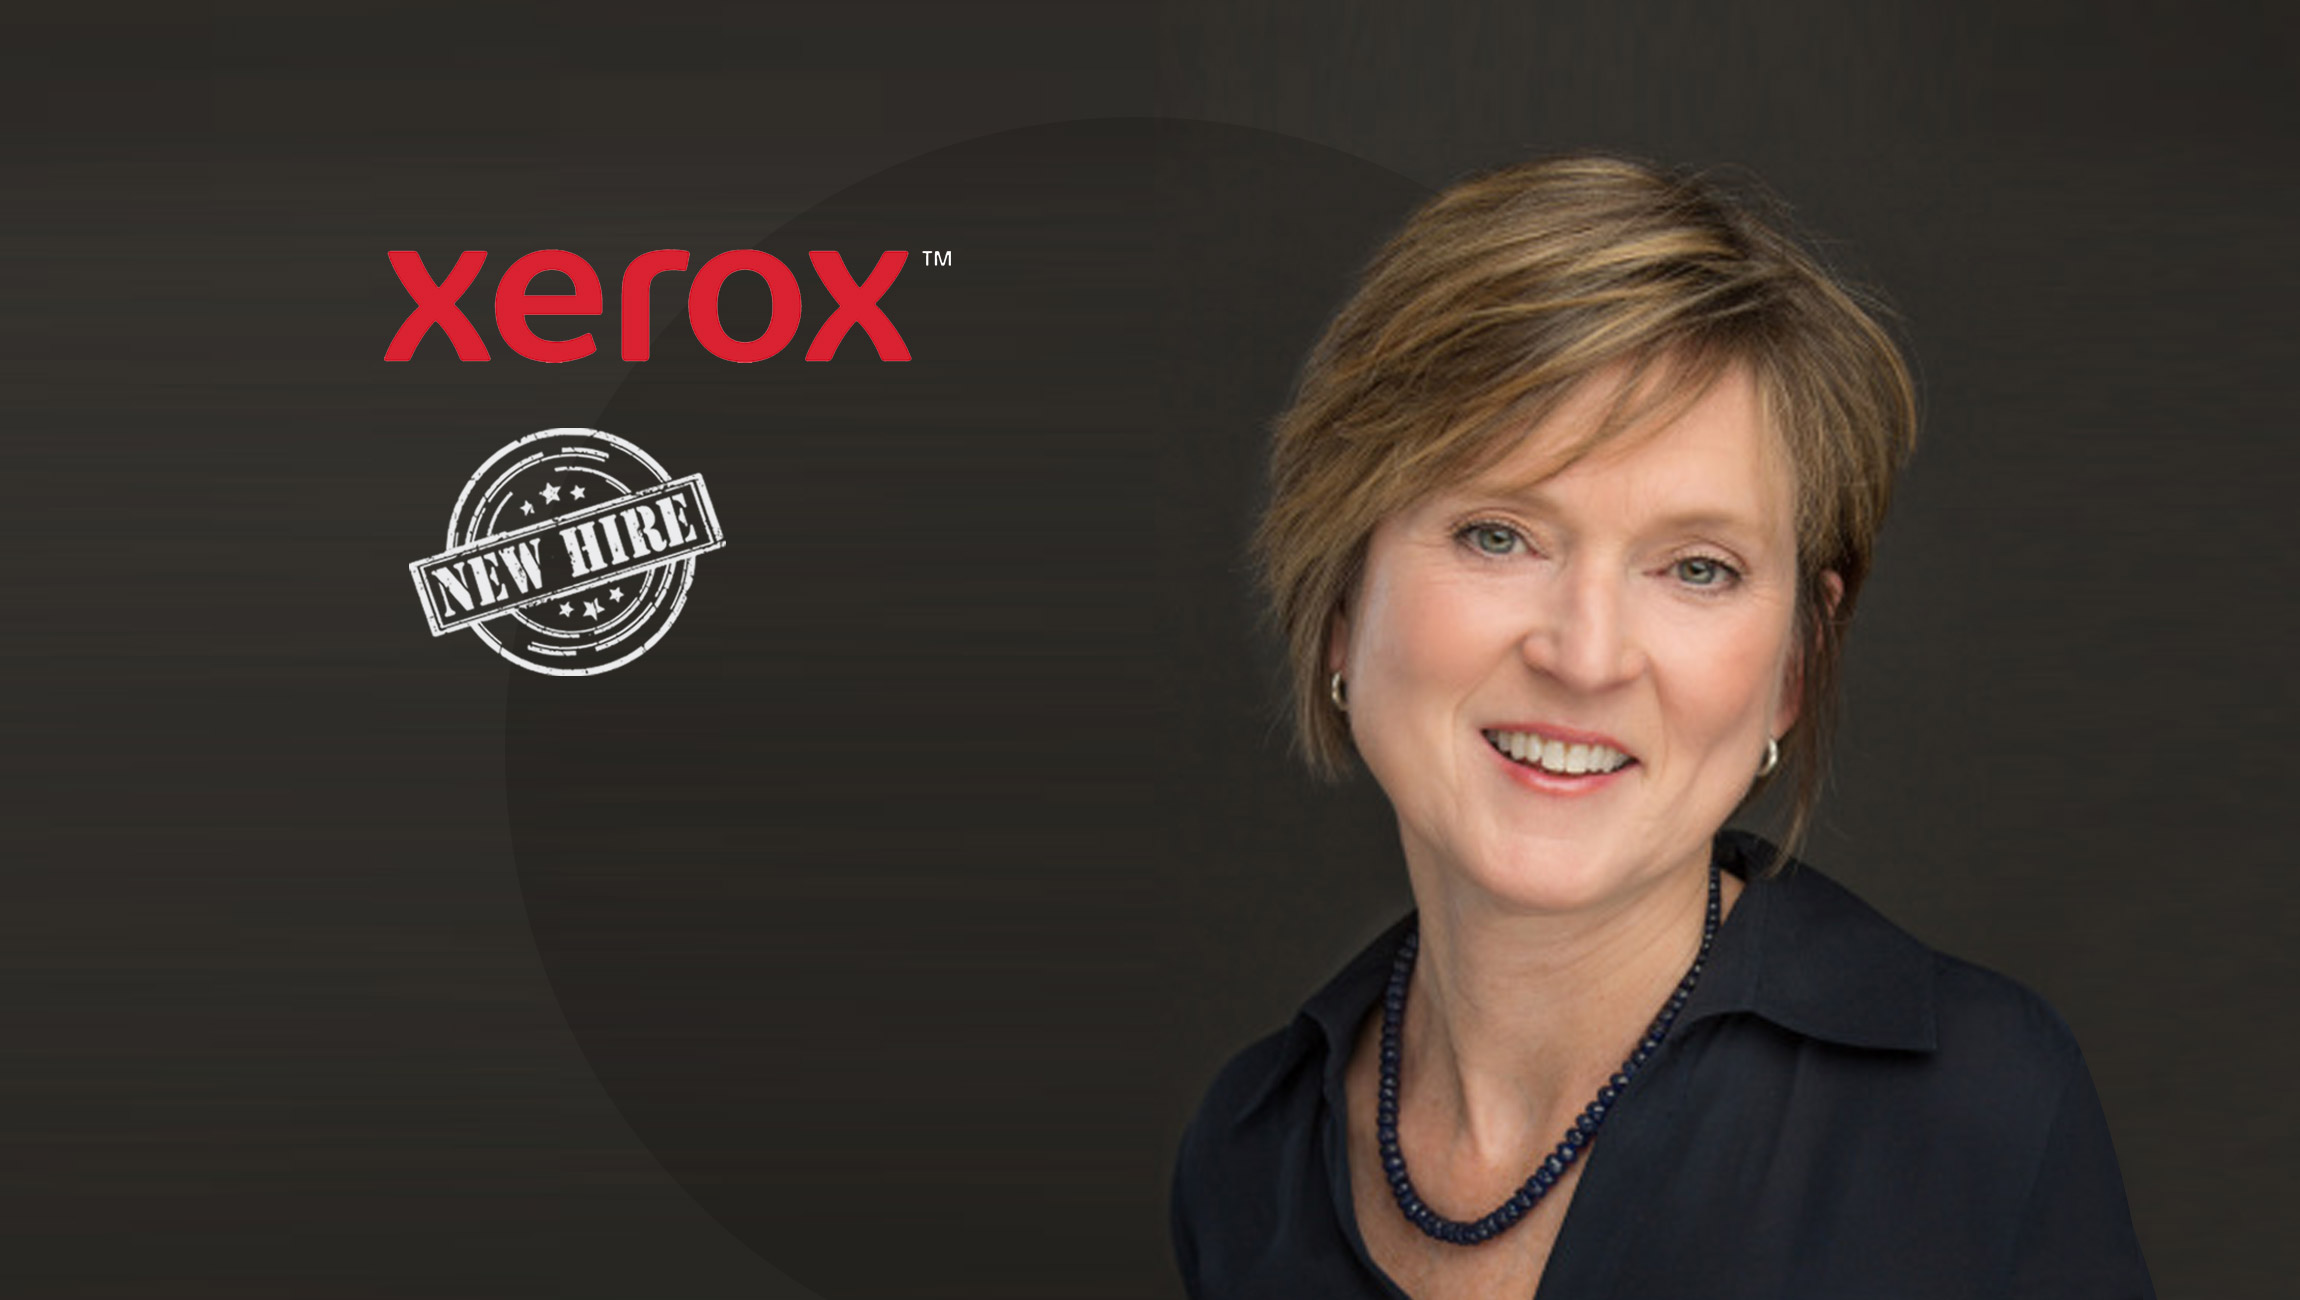 Xerox Names Mary McHugh Executive Vice President, Chief Delivery and Supply Chain Officer